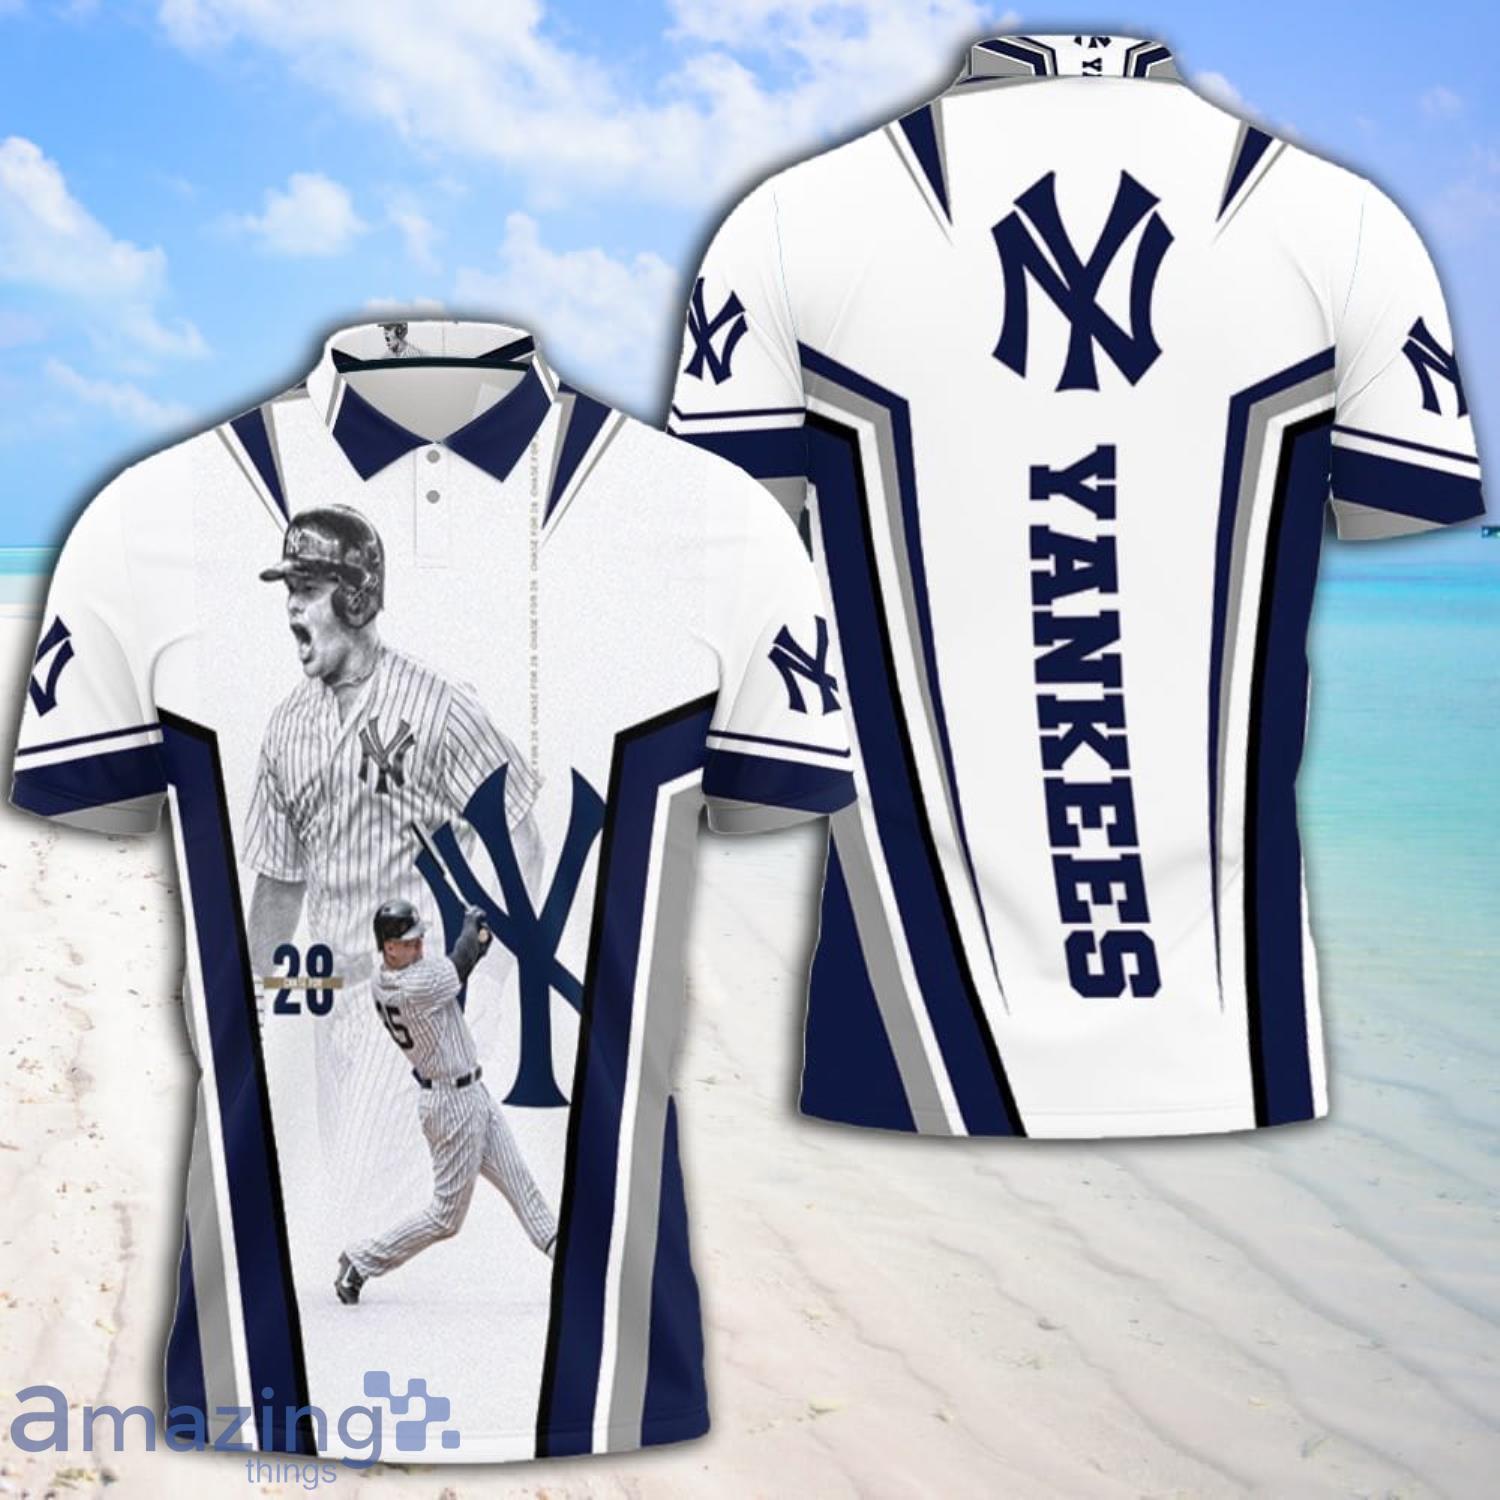 25 New York Yankees Gleyber Torres Chase For 28 Polo Shirt